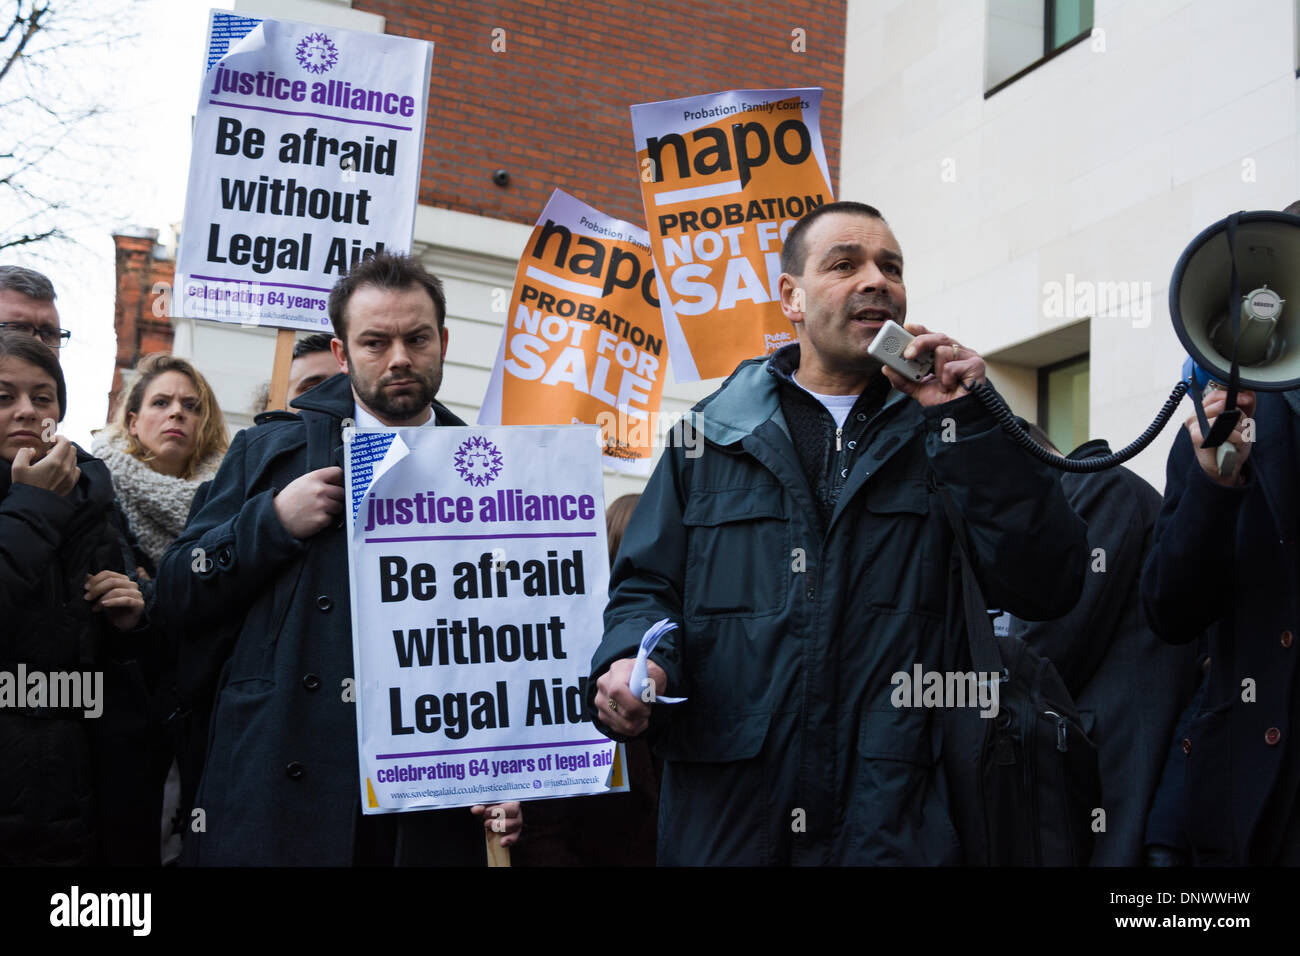 London, UK. 6th Jan, 2013.  Ian Lawrence of NAPO,  the union, professional association and campaign organisation for workers in the Probation Service speaks at a demonstration outside Westminster Magistrates Court against Government cuts to legal aid, as across England and Wales criminal barristers hold a half-day stoppage, the first such action by lawyers in British history. Credit:  Patricia Phillips/Alamy Live News Stock Photo